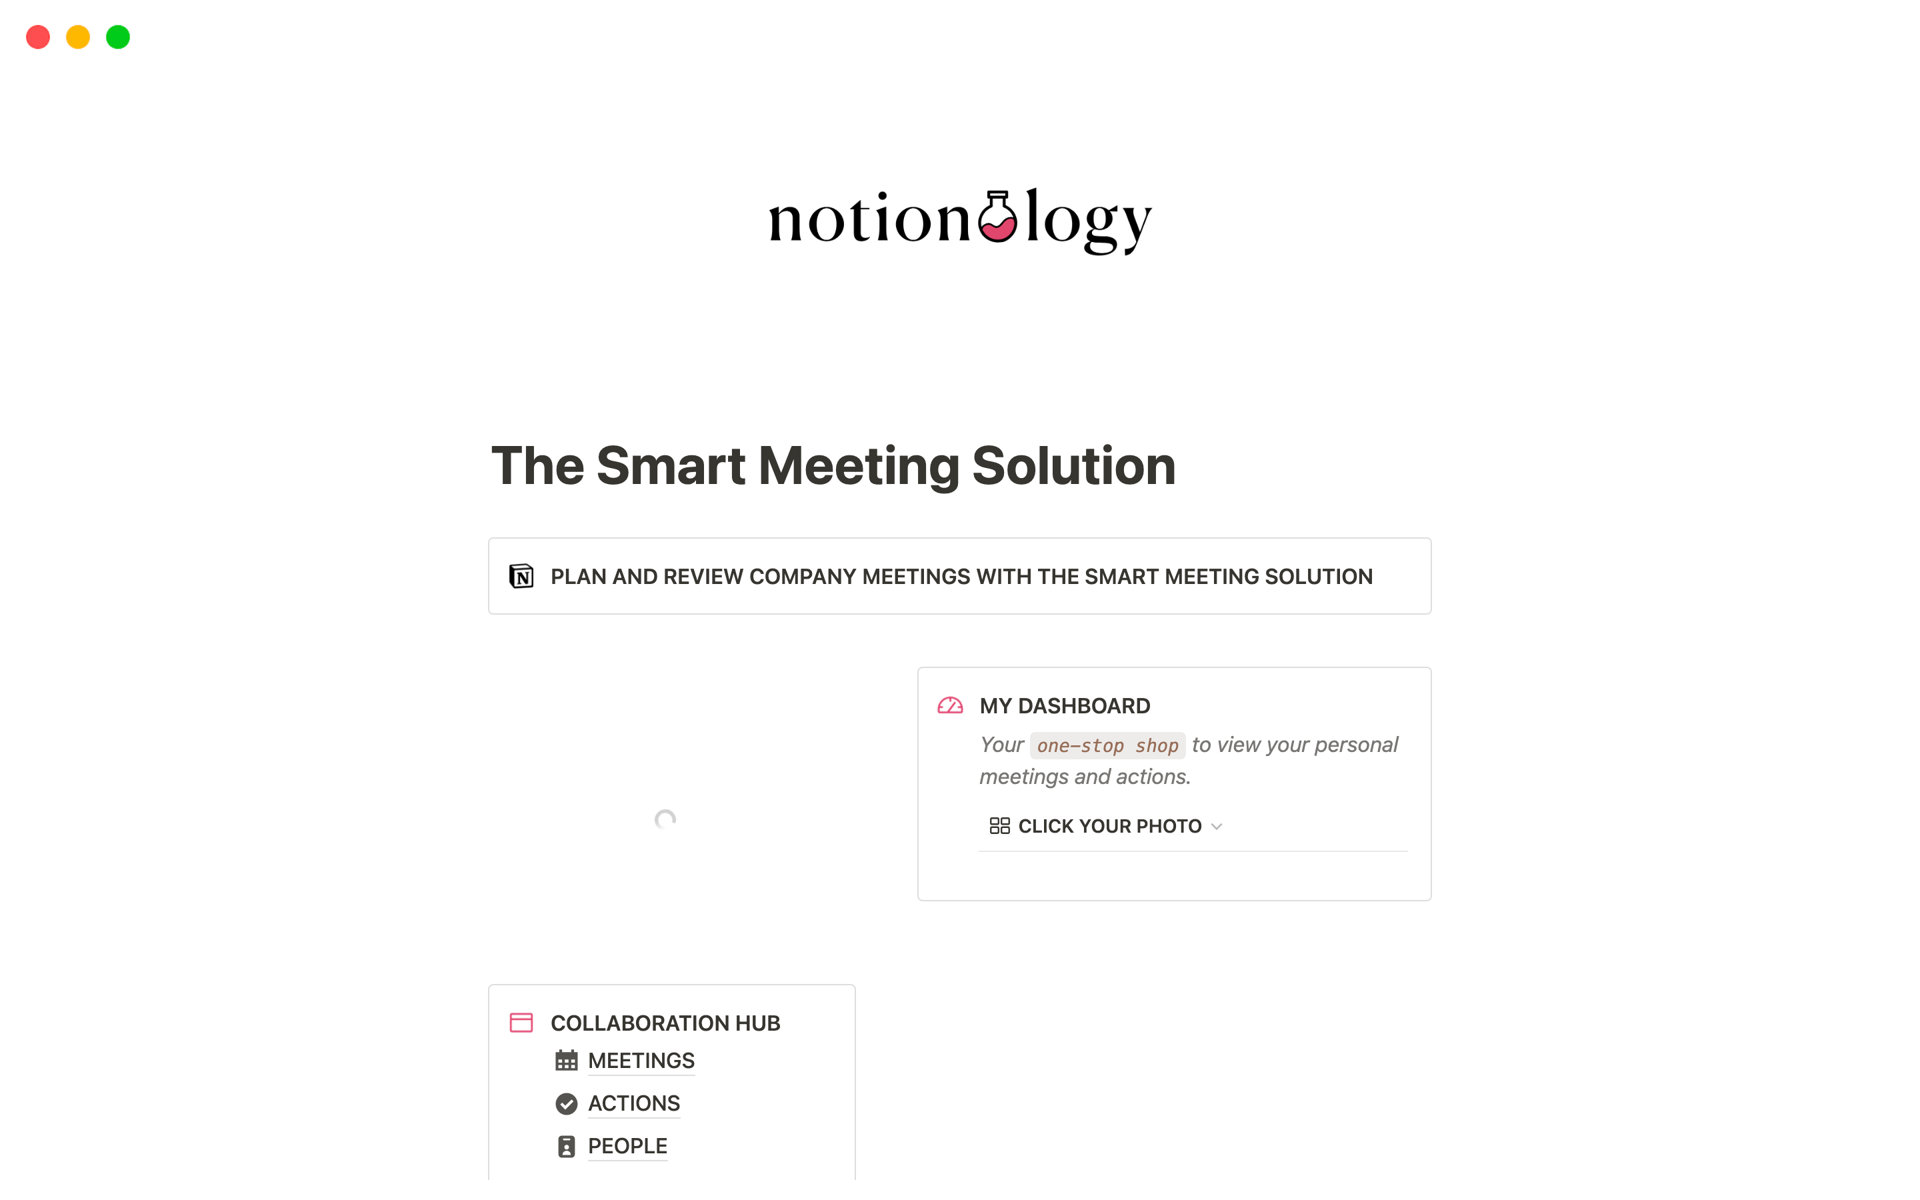 Revolutionize the way you run meetings with The Smart Meeting Solutions.